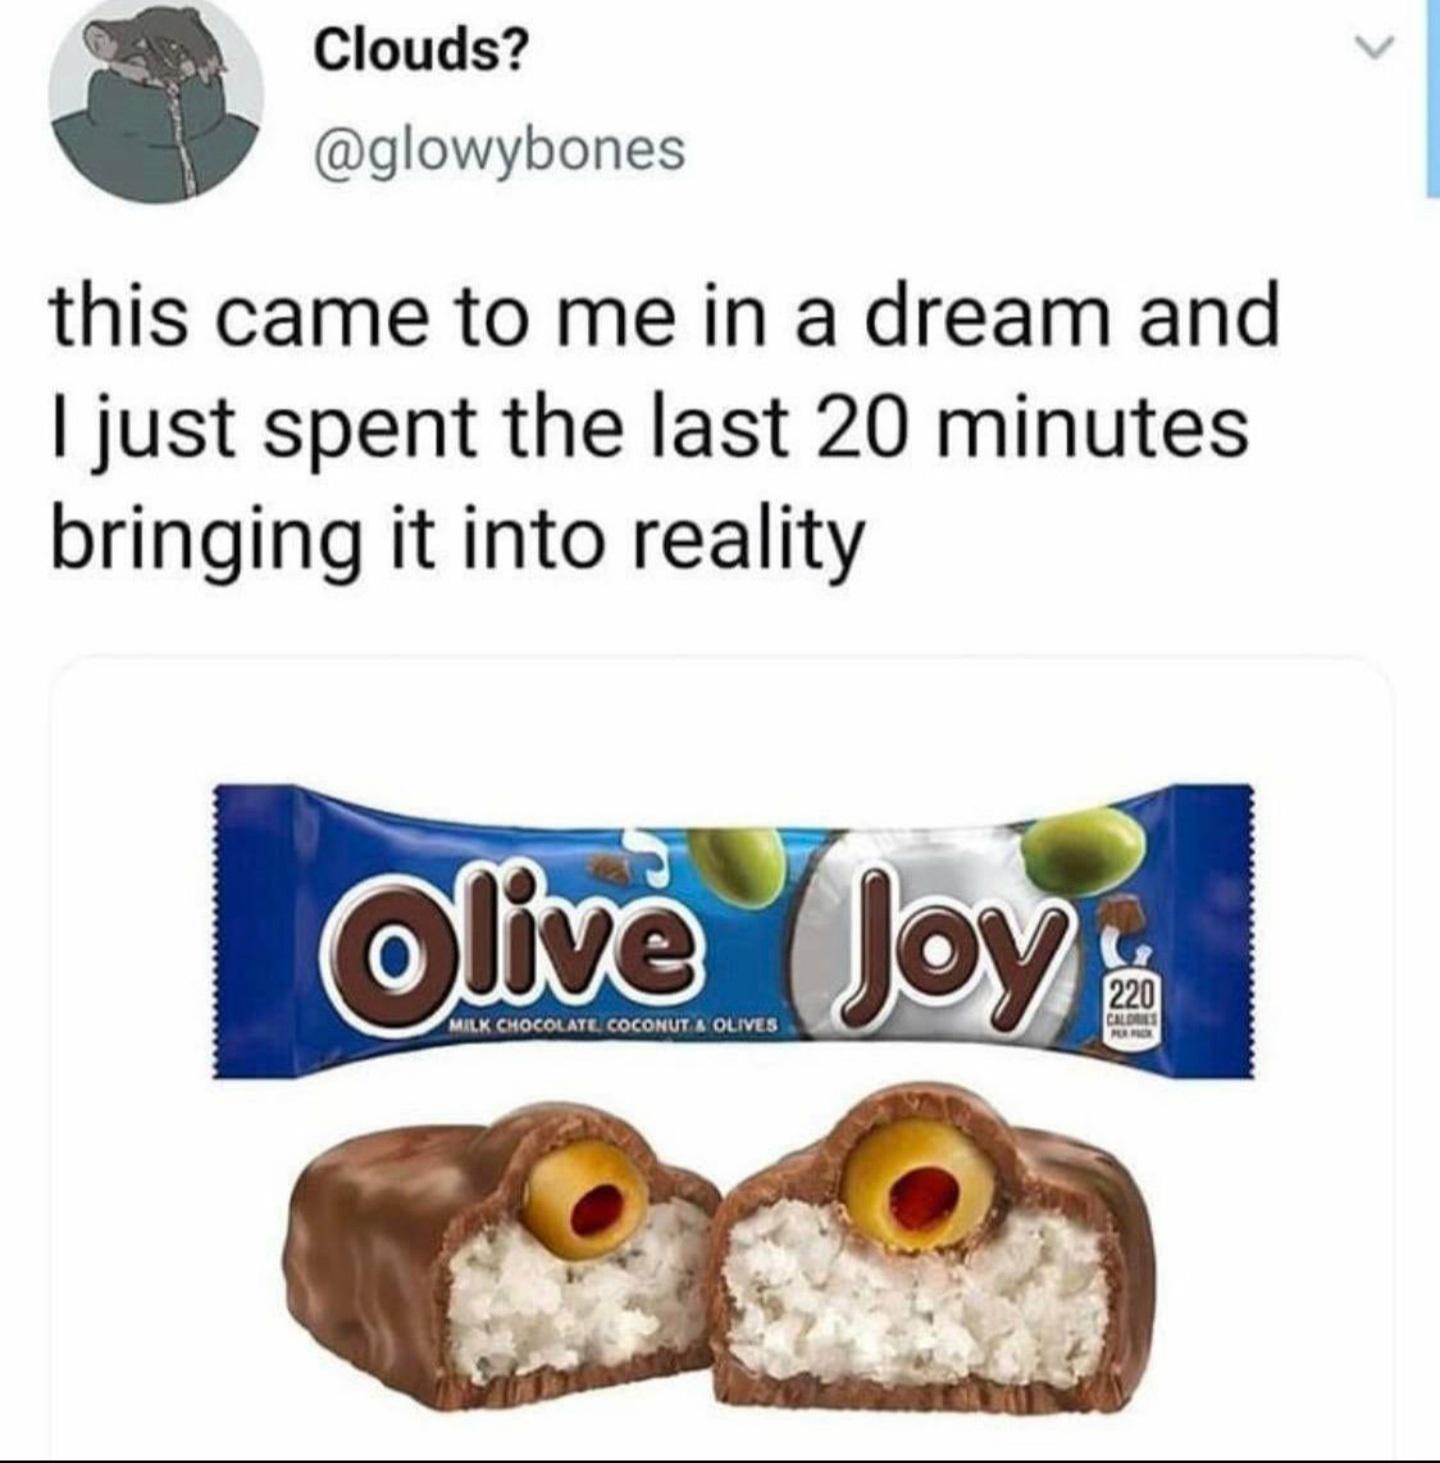 funny memes - cursed food - Clouds? this came to me in a dream and I just spent the last 20 minutes bringing it into reality Olive Joy 220 Milk Chocolate Coconut A Olives Calde